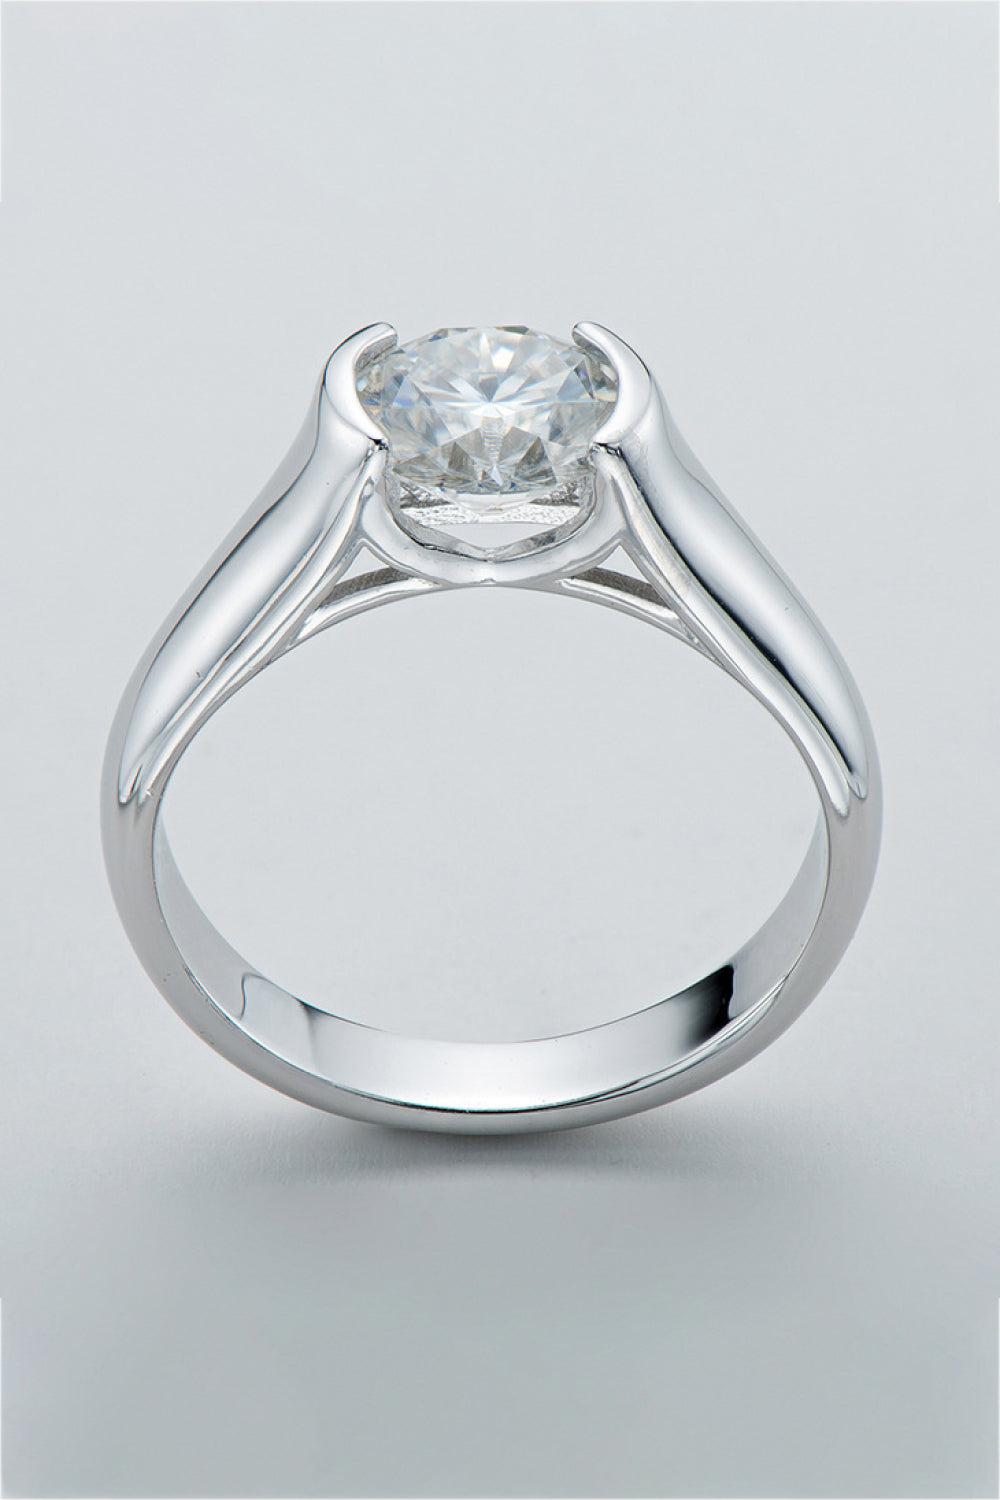 Looking Good 2 Carat Moissanite Platinum-Plated Ring BLUE ZONE PLANET